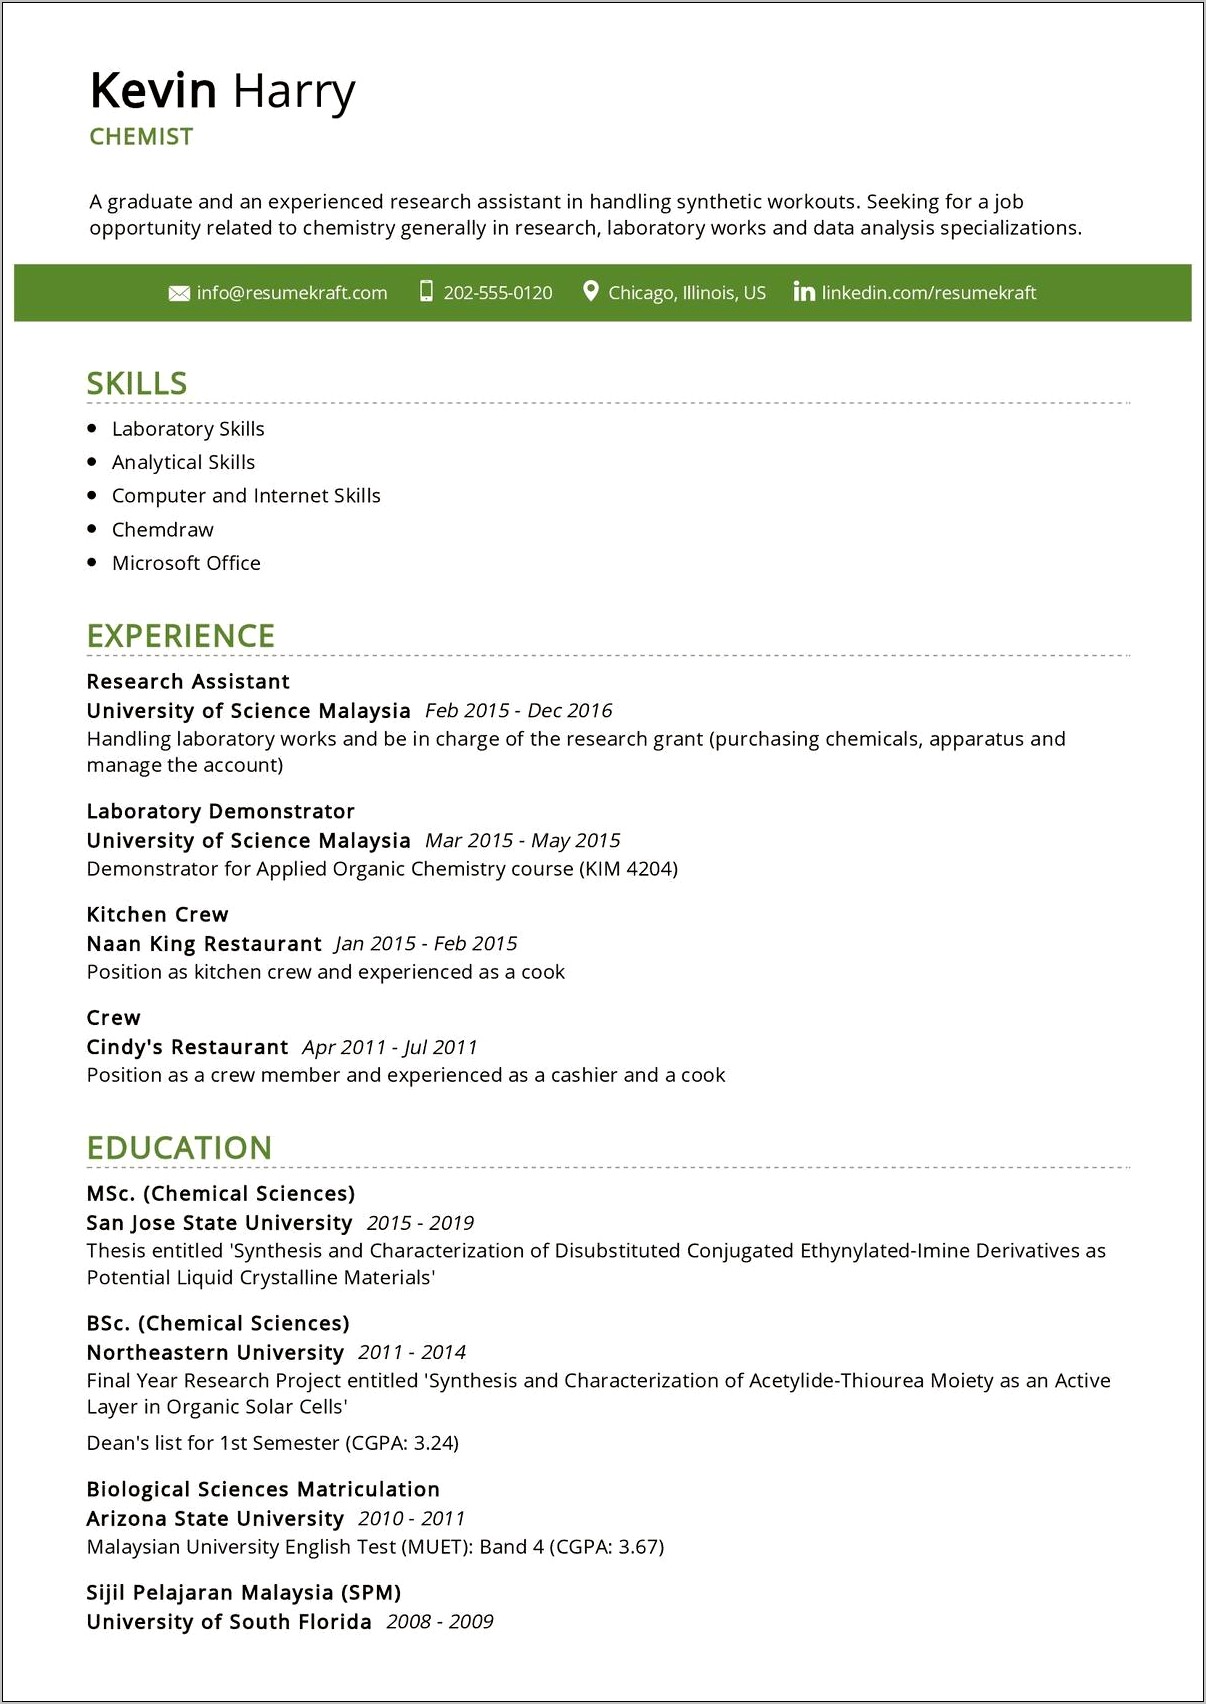 Example Of Best Resume Malaysia